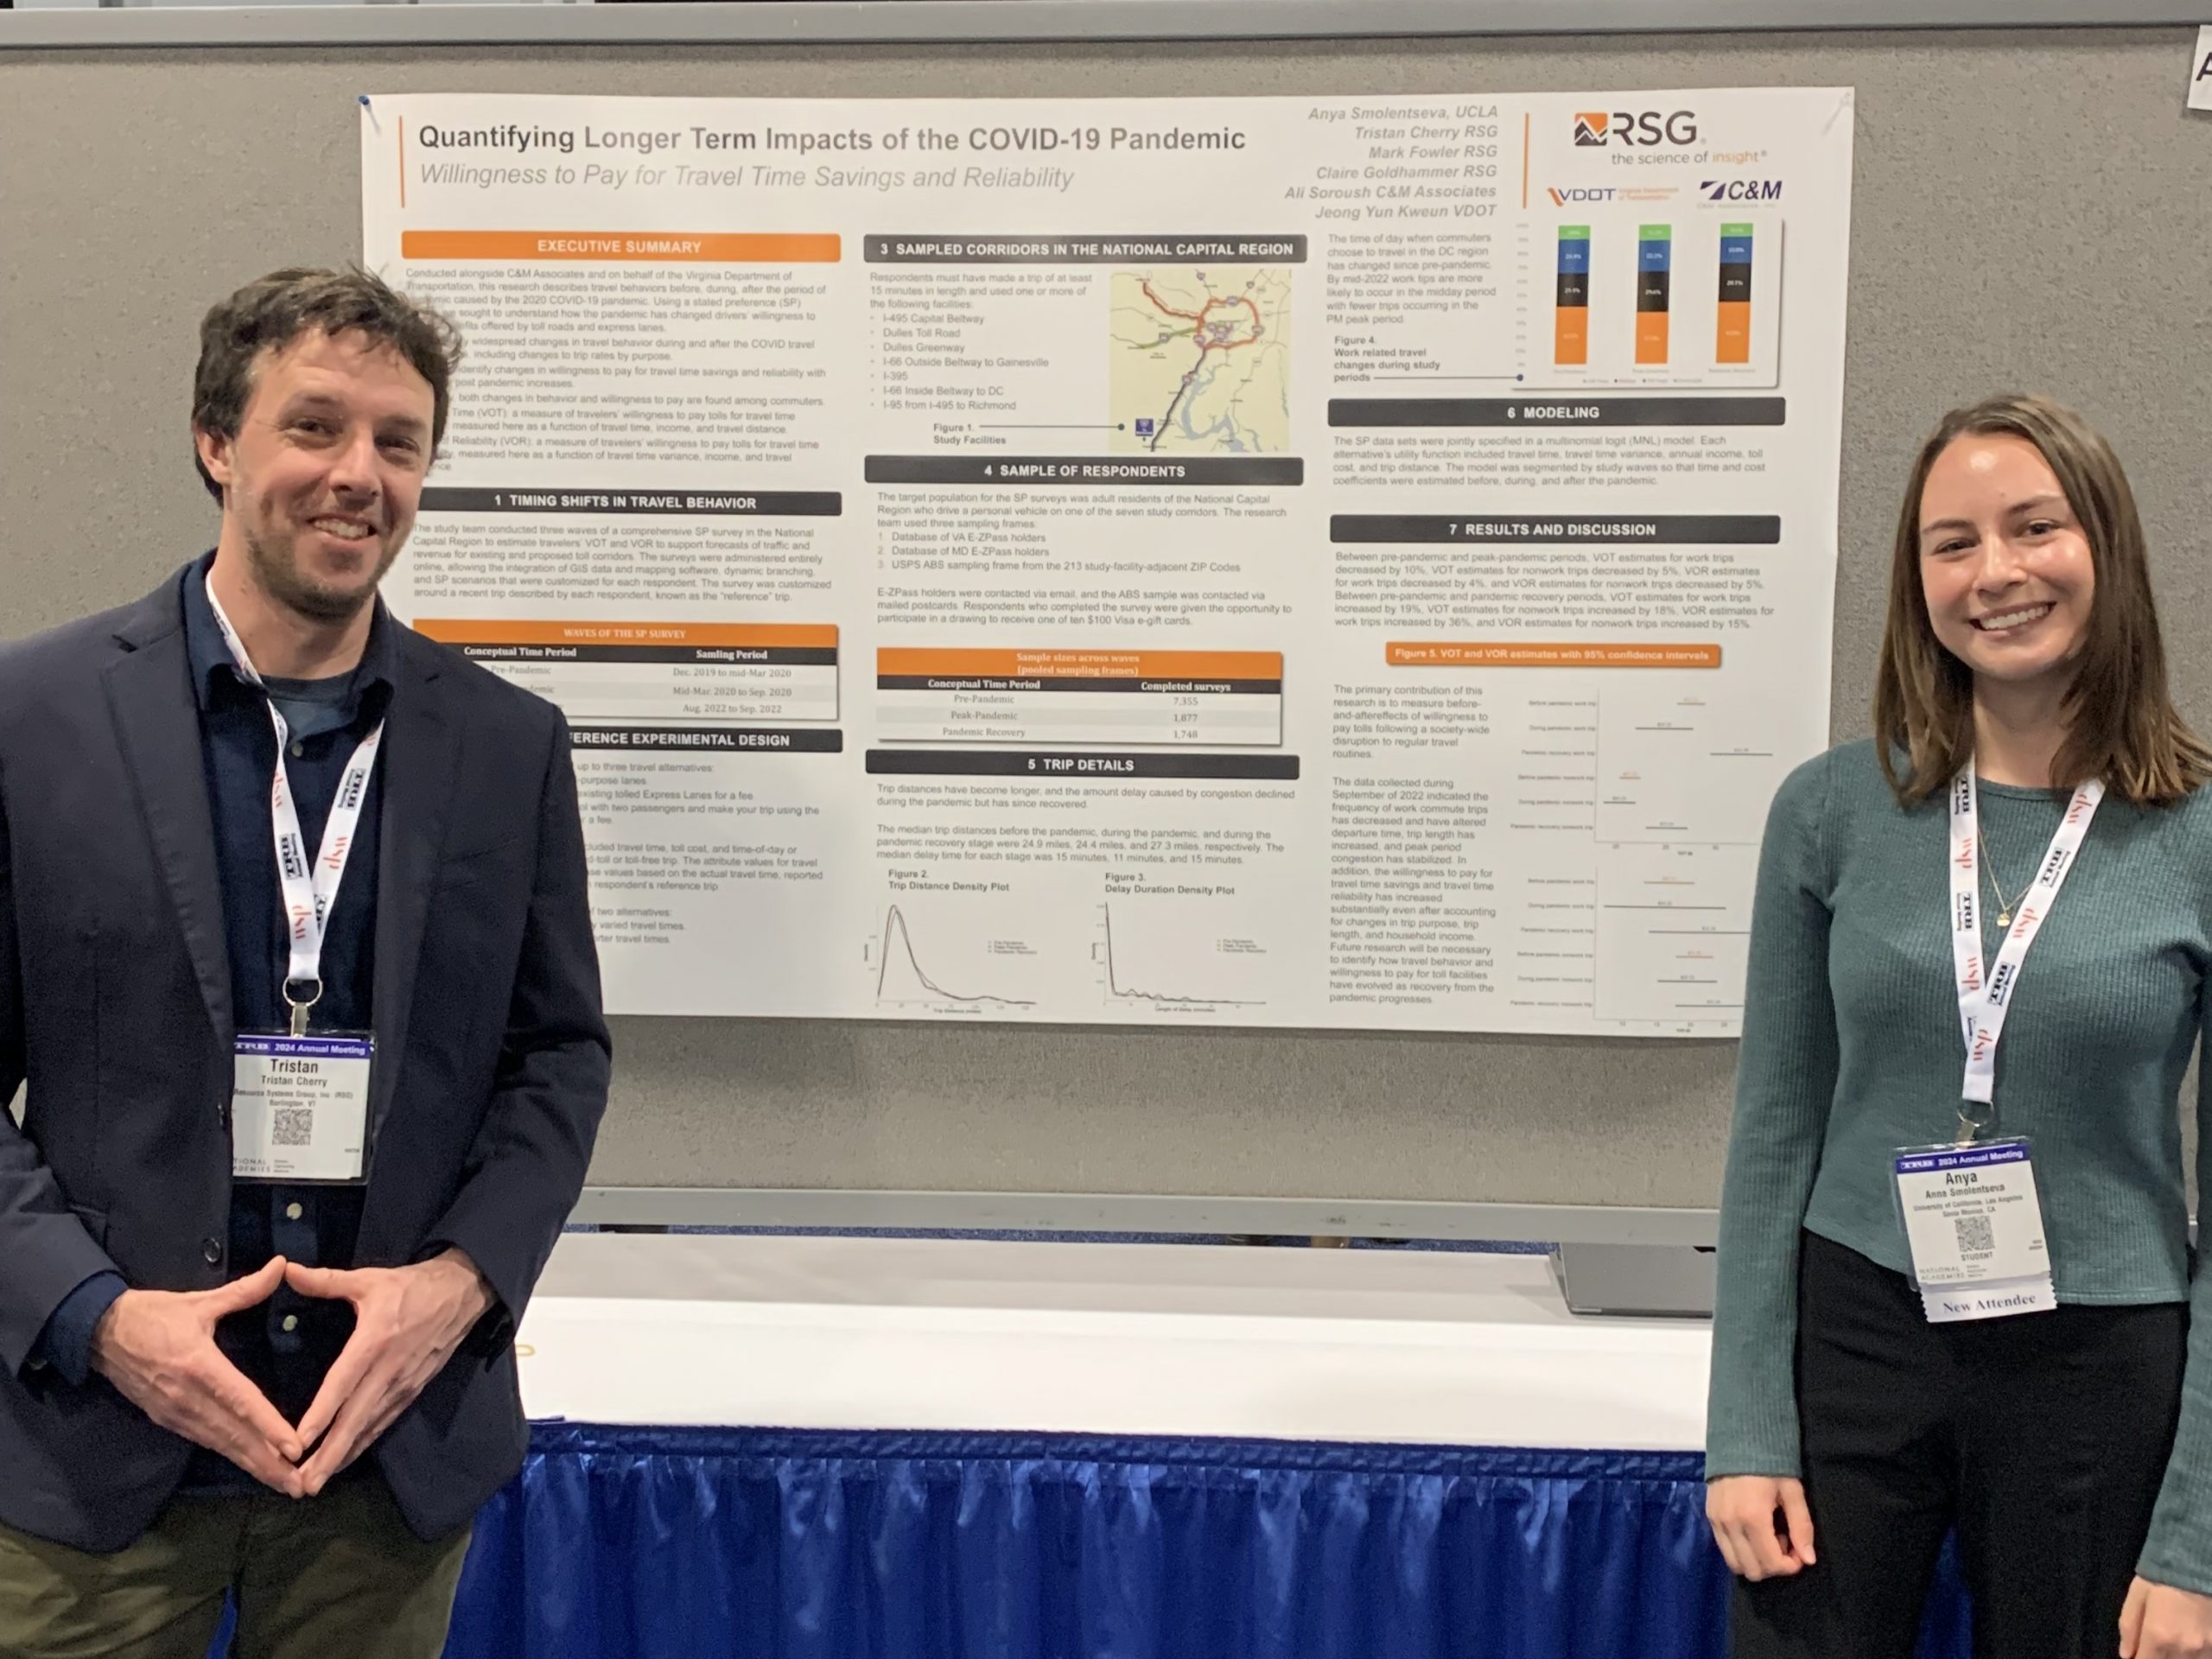 Image of Tristan Cherry and Anya Smolentseva presenting their poster at TRB 2024.